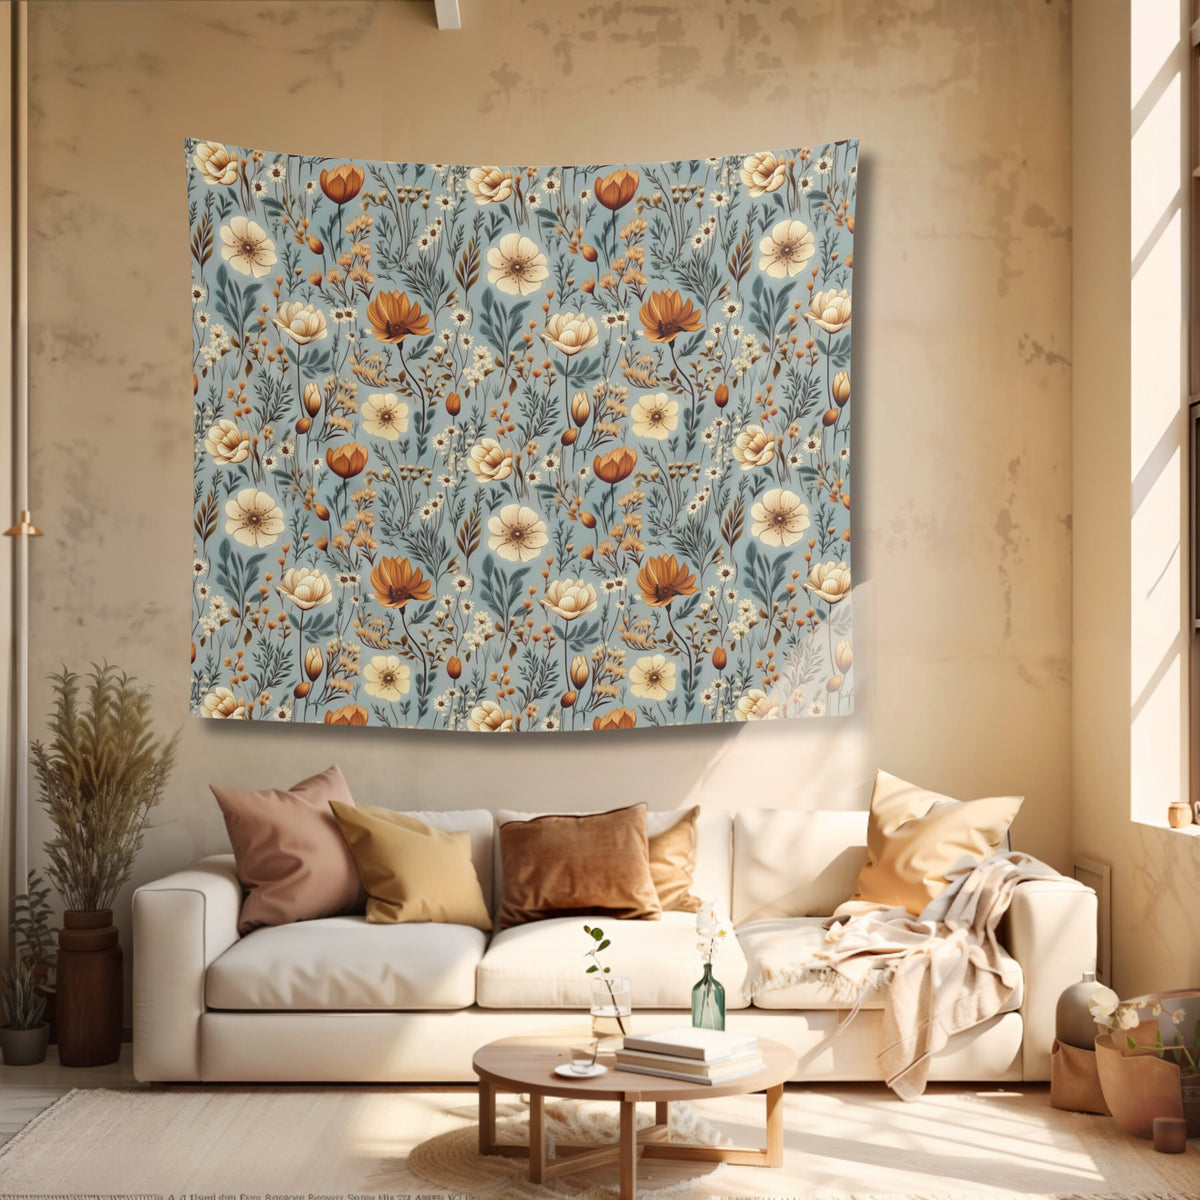 Boho Wall Bedroom Tapestry Copper Floral Meadow Wall Hanging for Living Room Cottagecore Aesthetic Nursery Decor for Boho Office Decoration